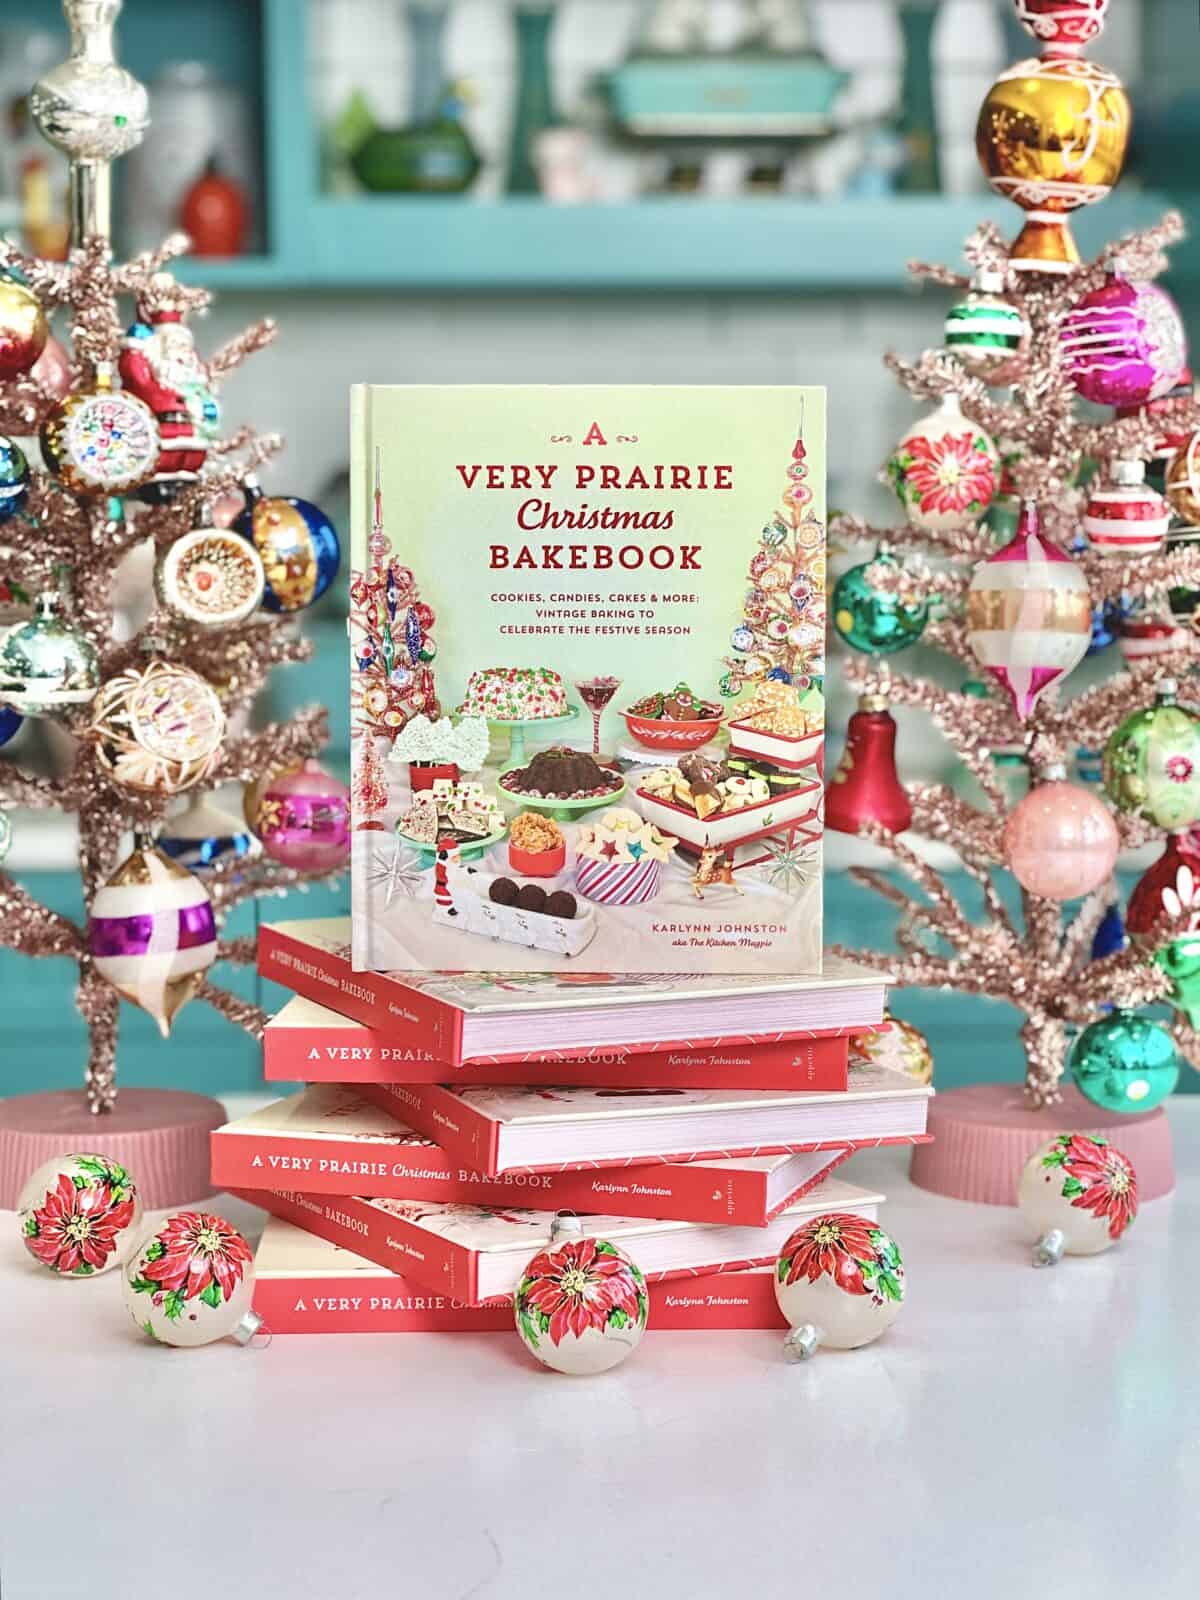 A Very Prairie Christmas Bakebook with Christmas trees